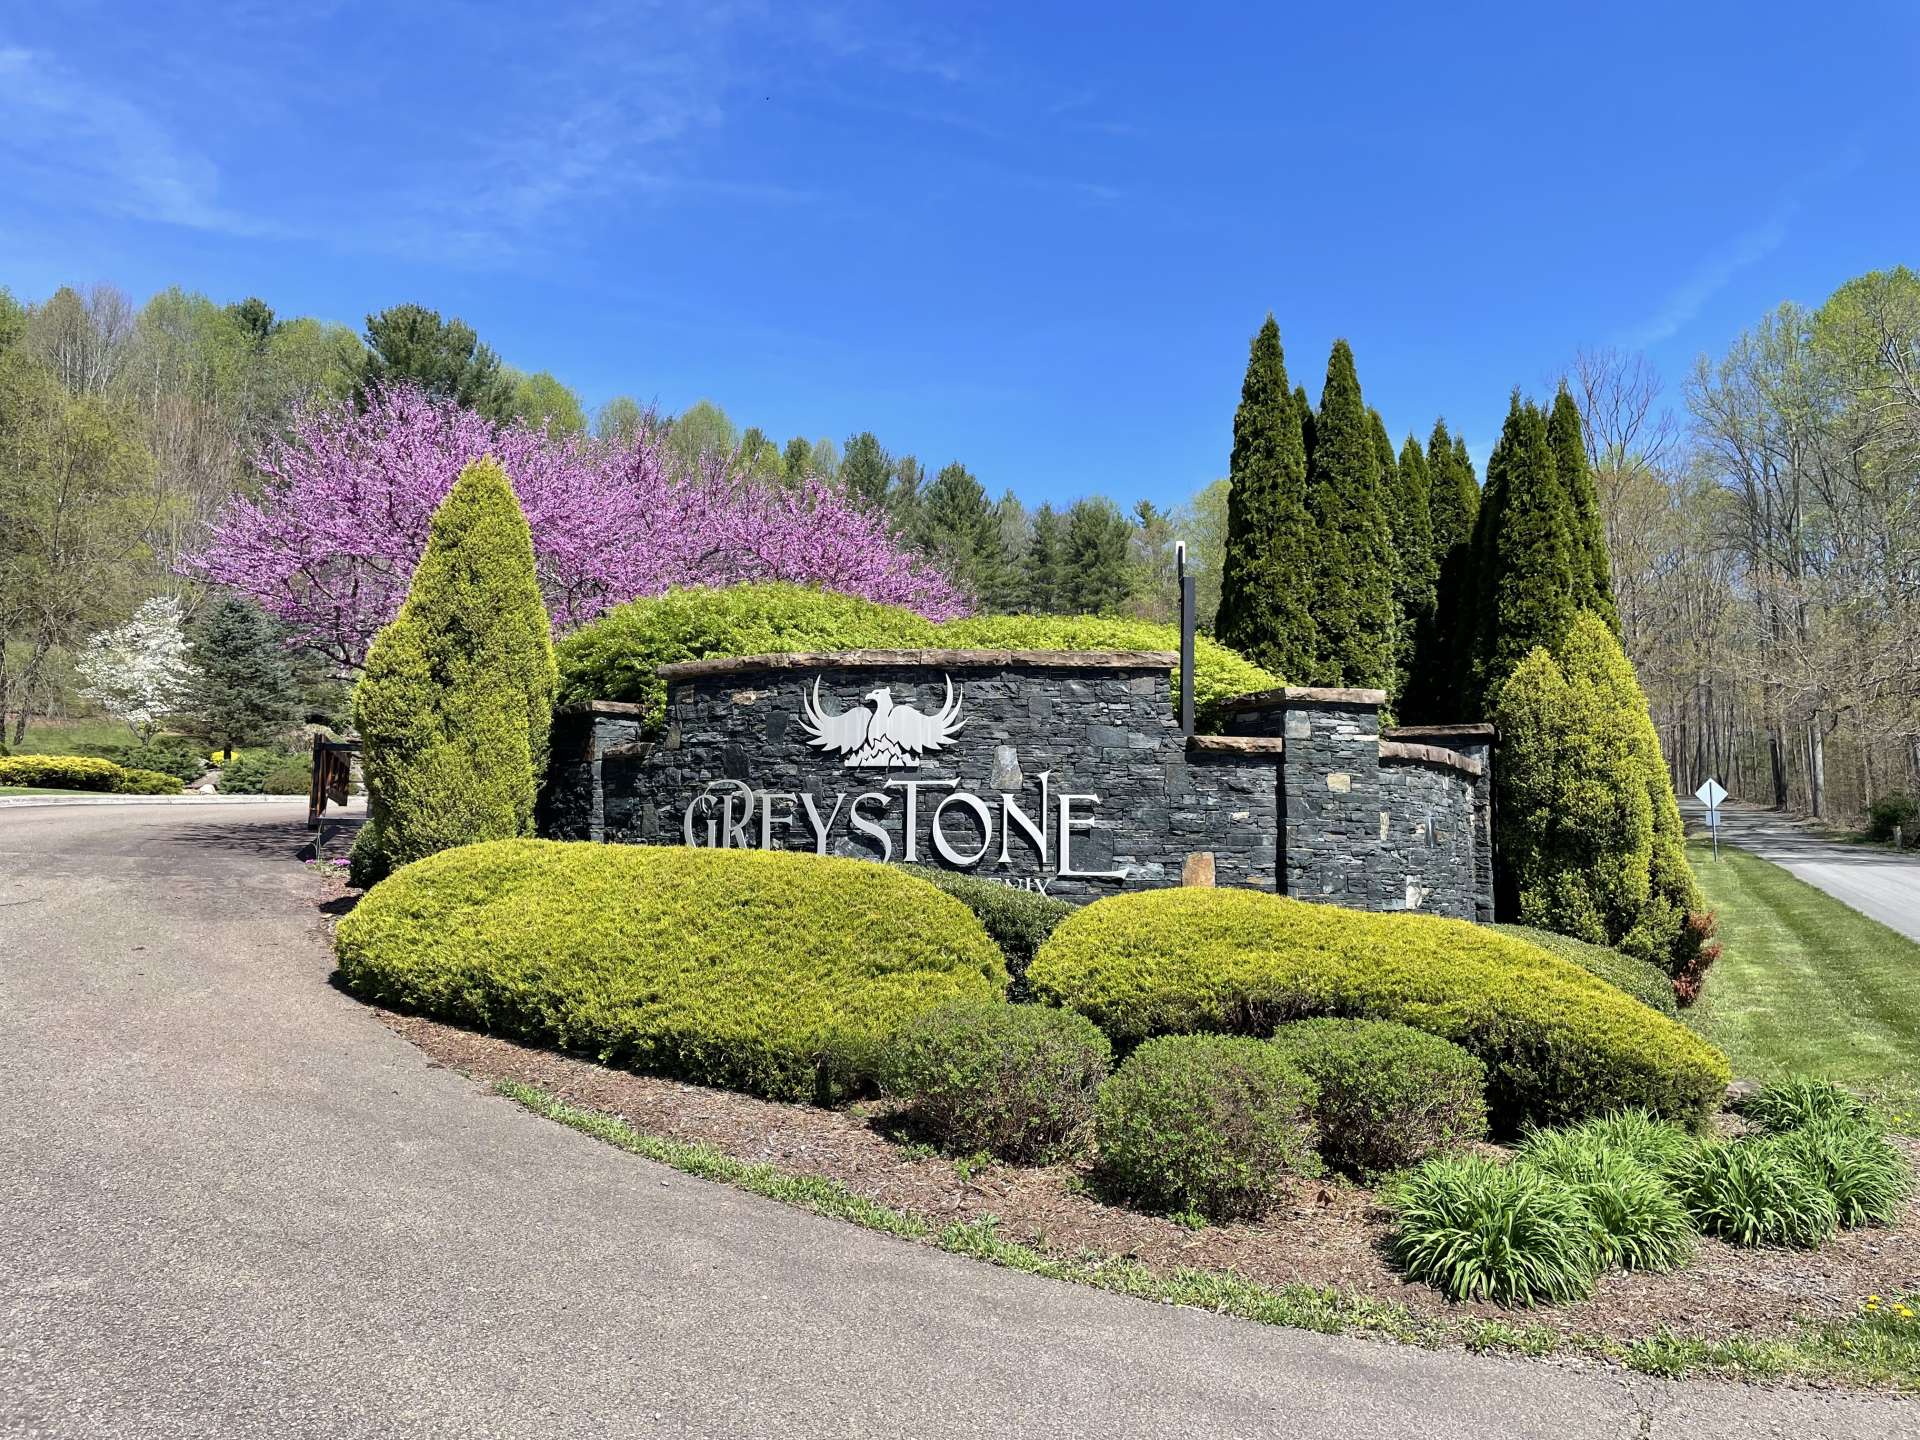 Well landscaped entry to Greystone at Phoenix.